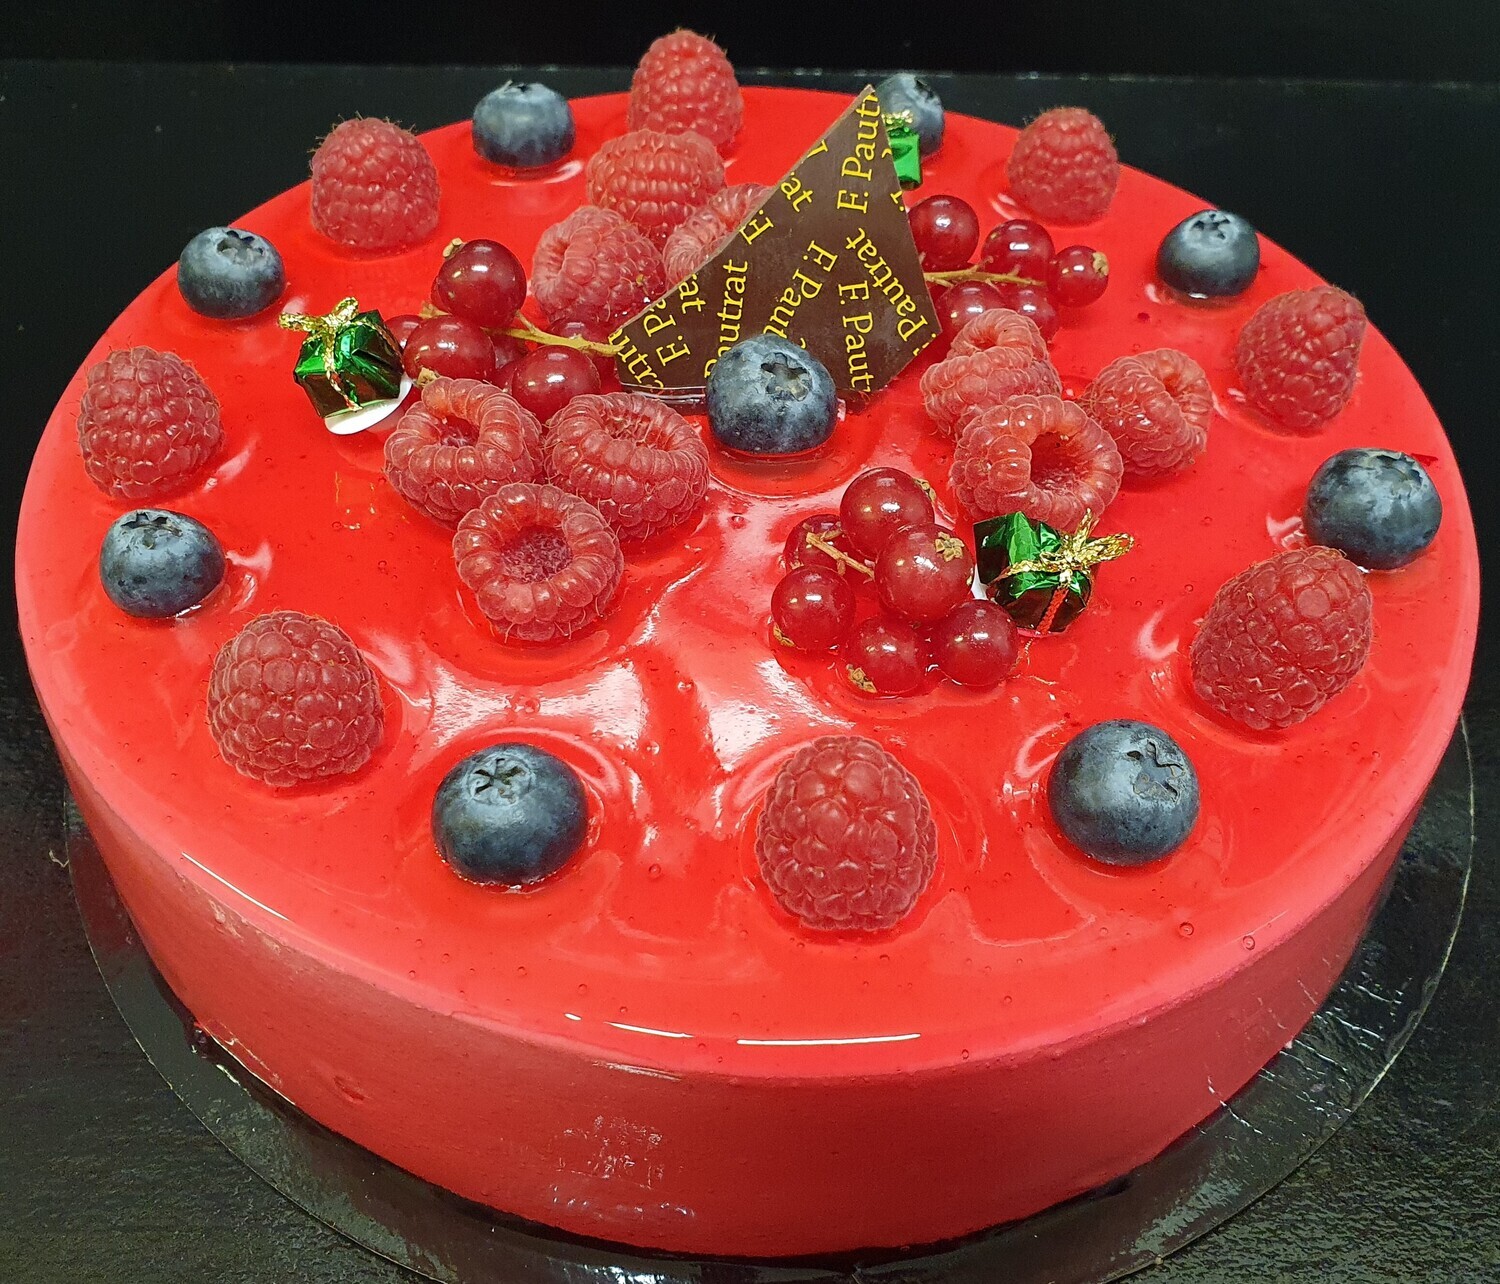 DELICE FRAMBOISE FRUITS ROUGES 8 personnes